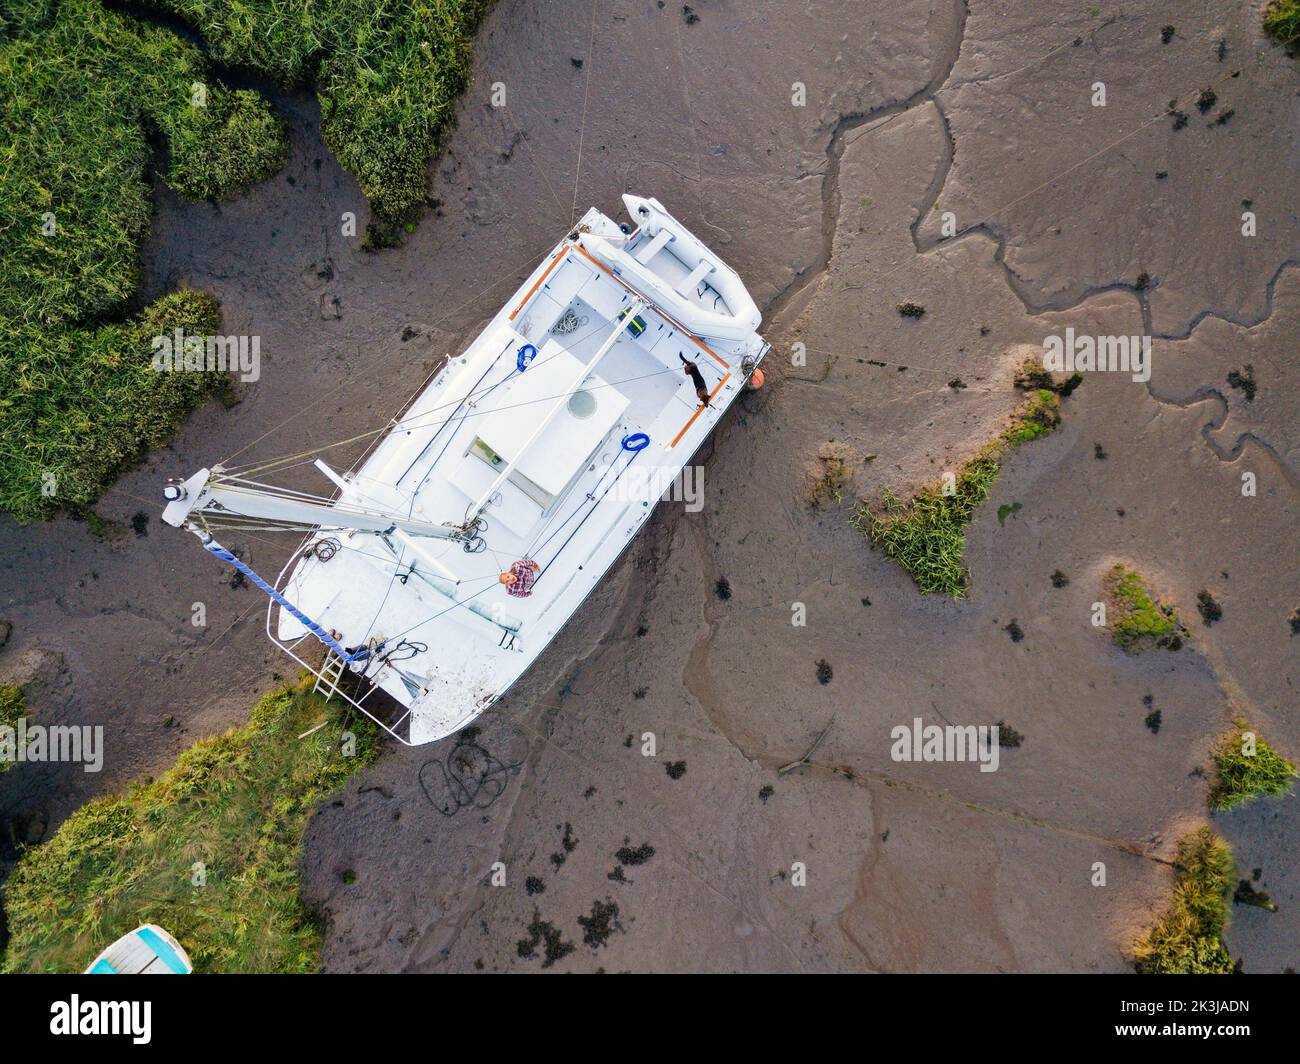 An aerial view of a catamaran sailing boat moored on a river bank Stock Photo